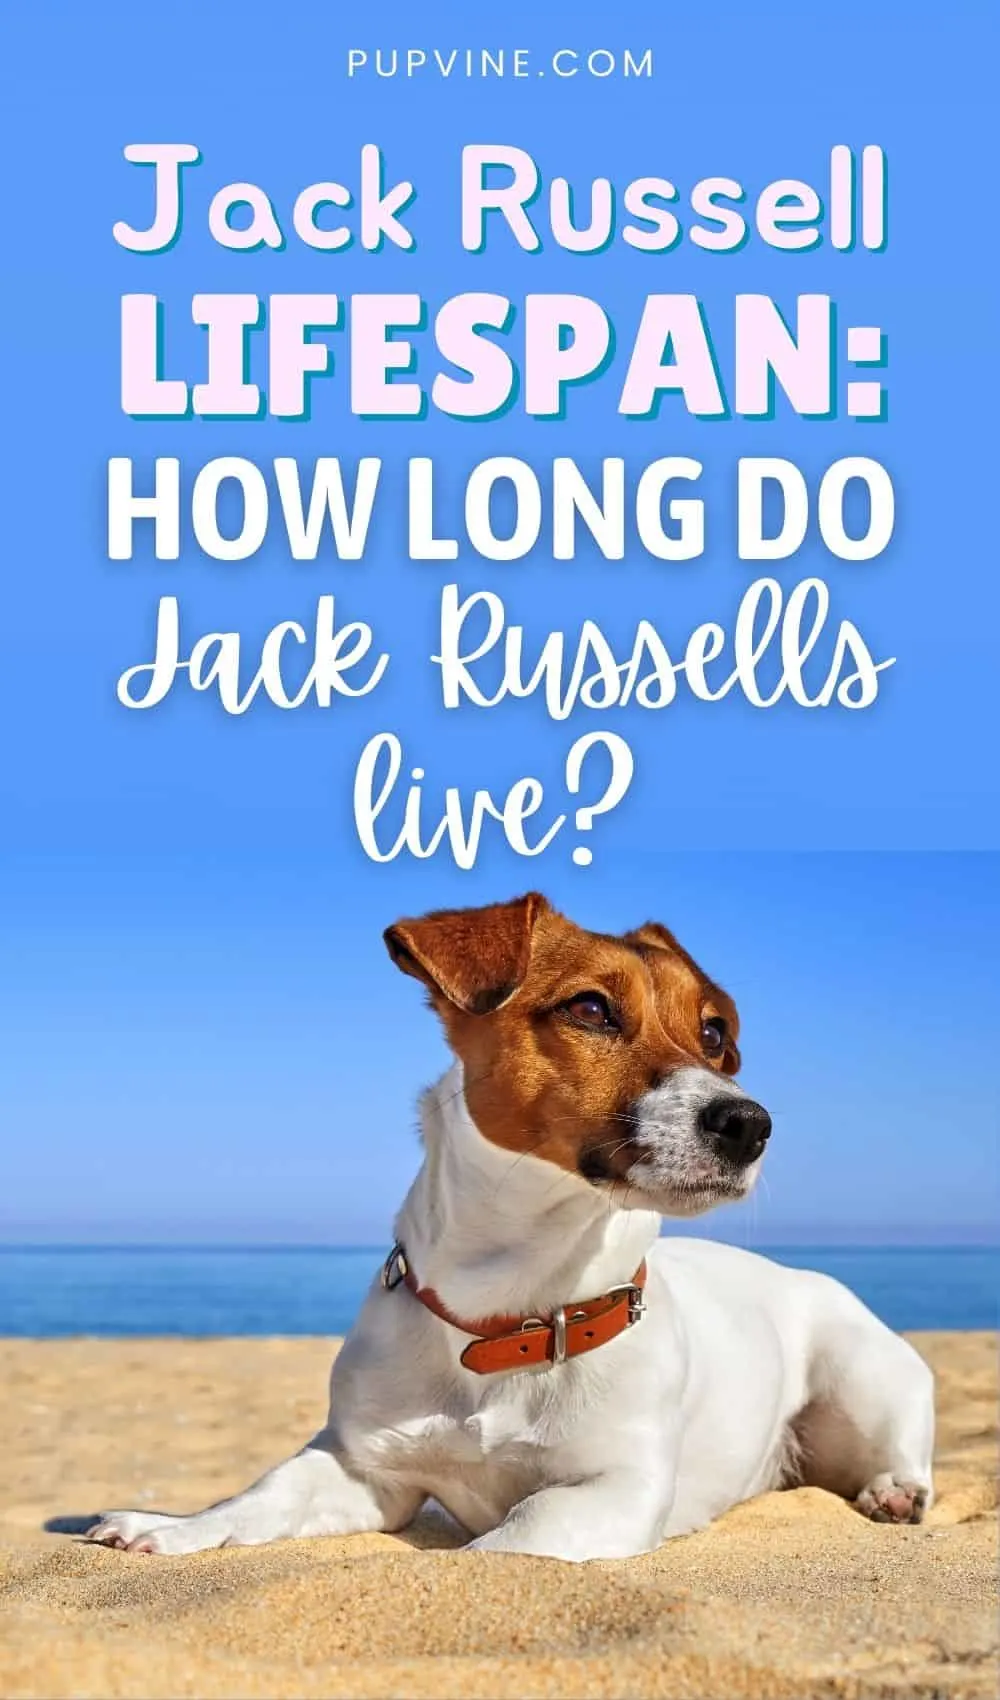 Jack Russell Lifespan: How Long Do Jack Russells Live?